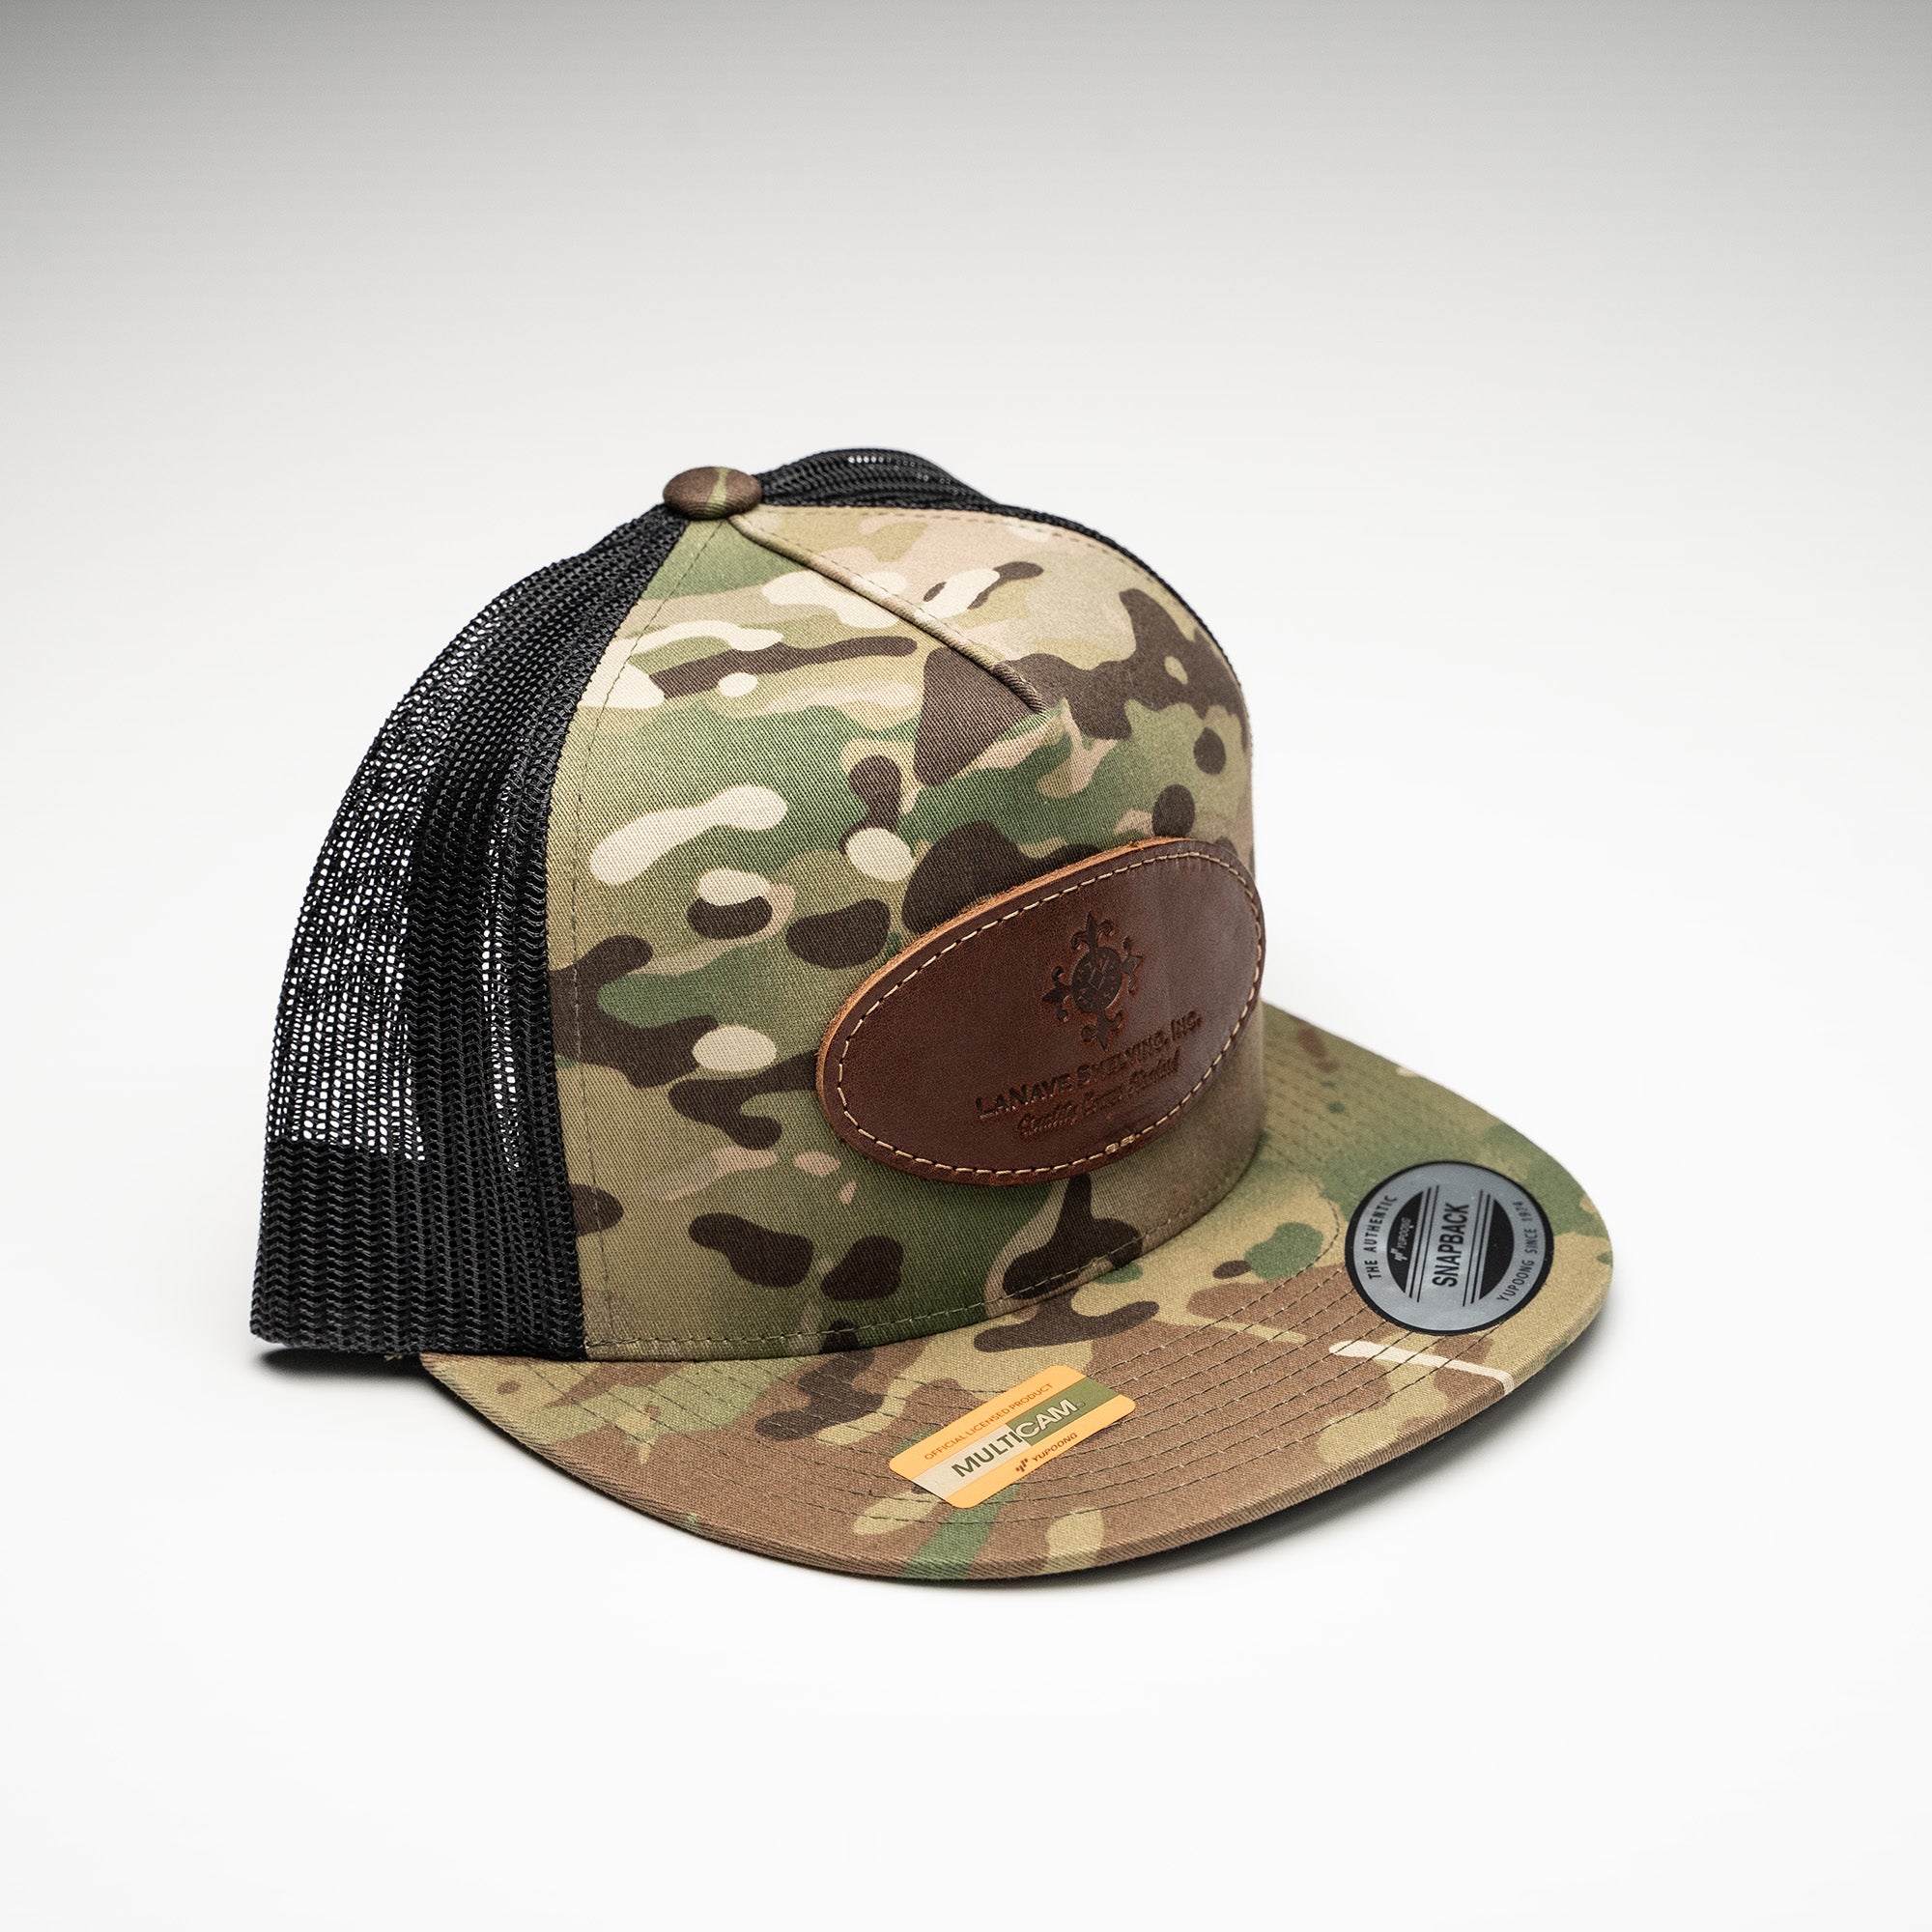 Debossed Heat Pressed - Yupoong 6006MC Cap Camo Trucker Mesh Snapback Hat ~ Customized with YOUR LOGO